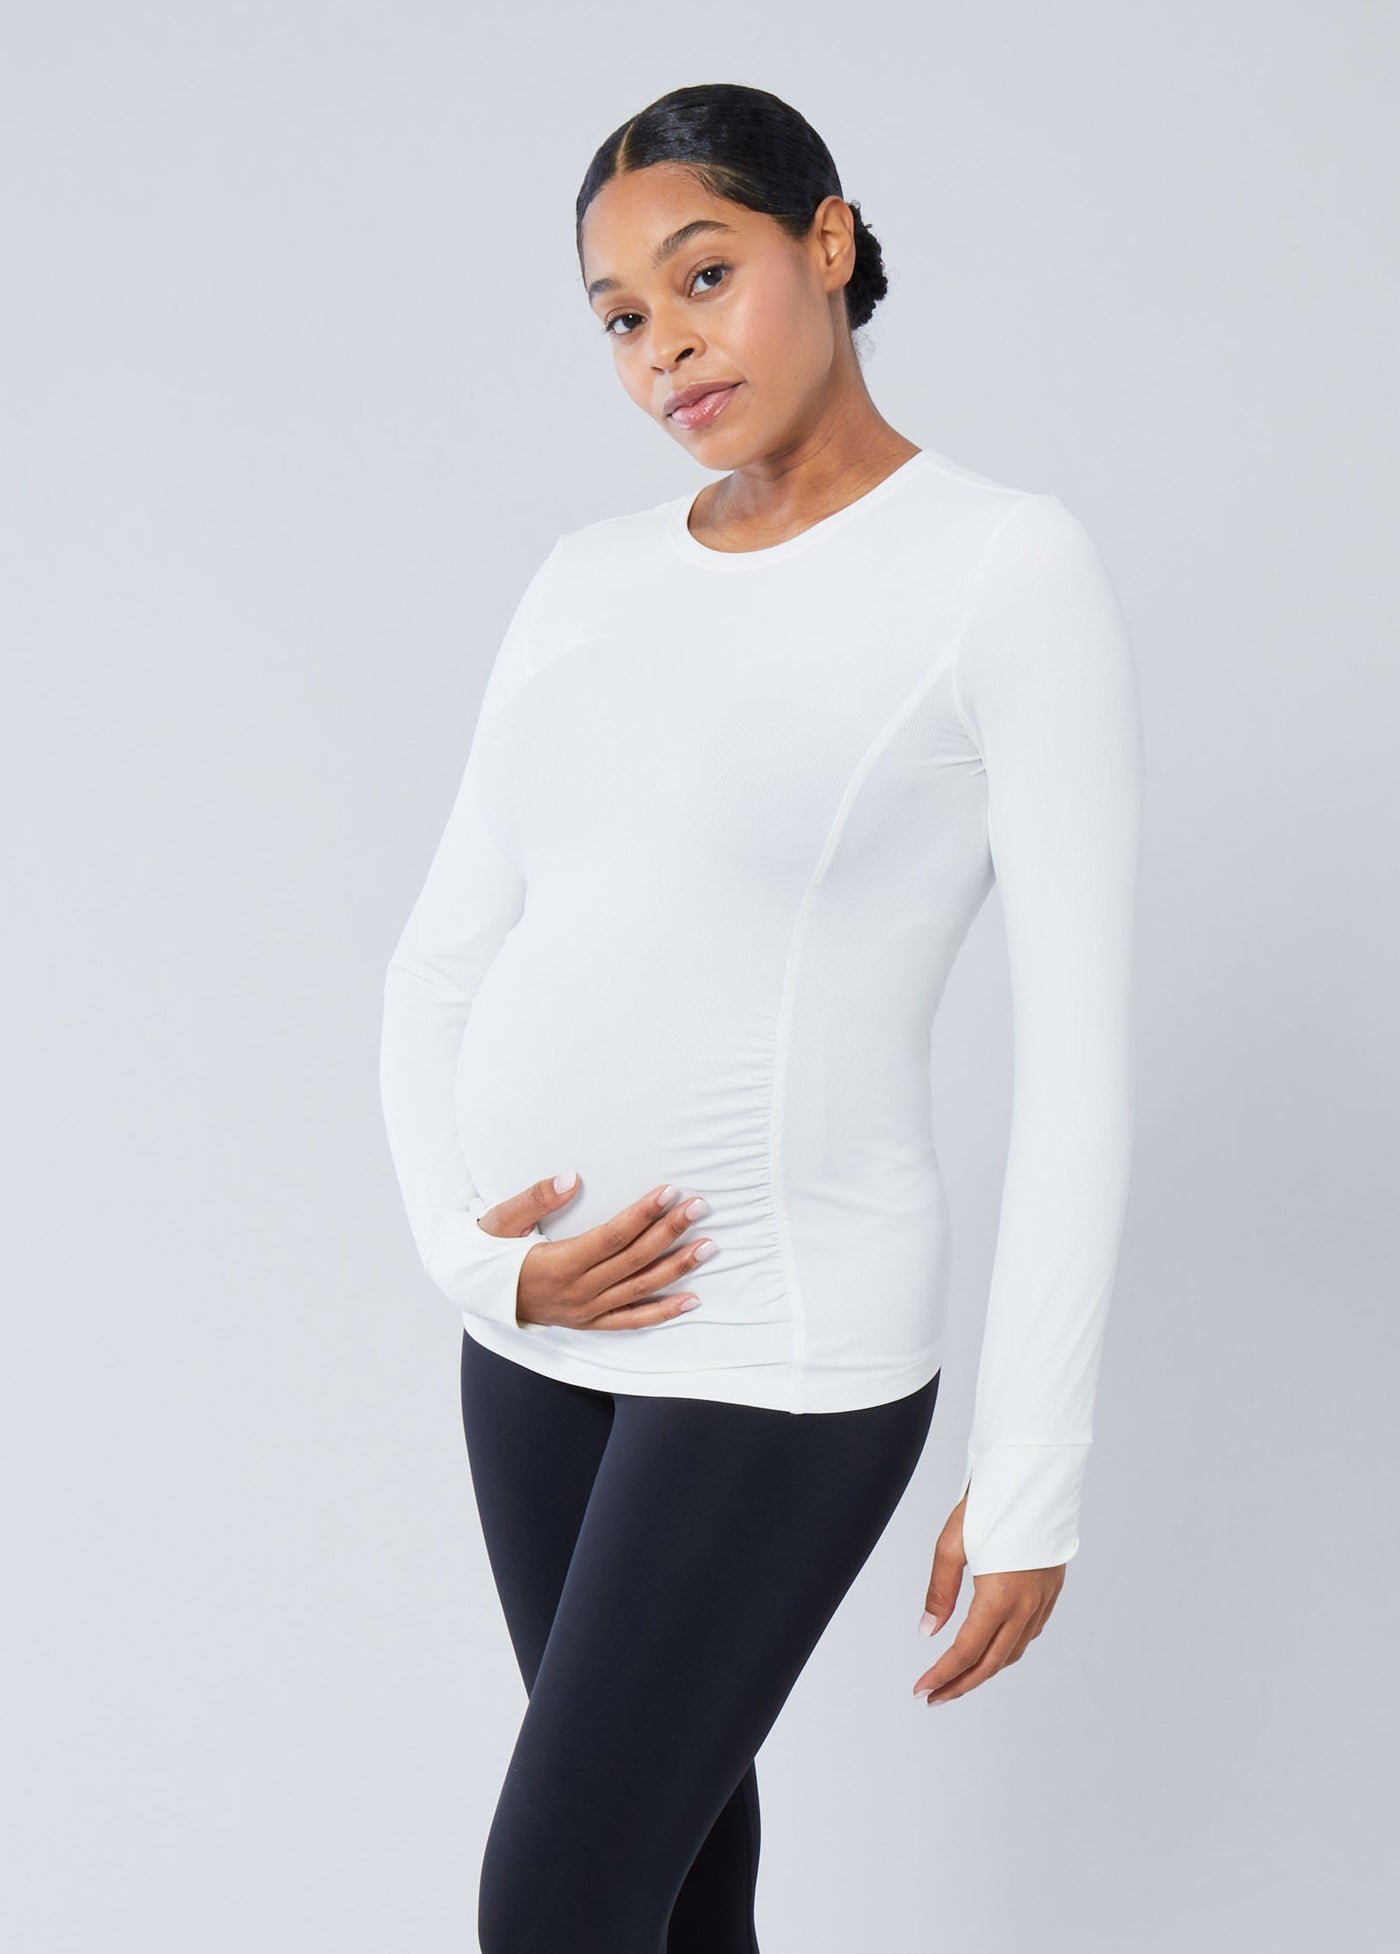 Jasmine is 5’7”, 8 months pregnant and wearing a size small||White